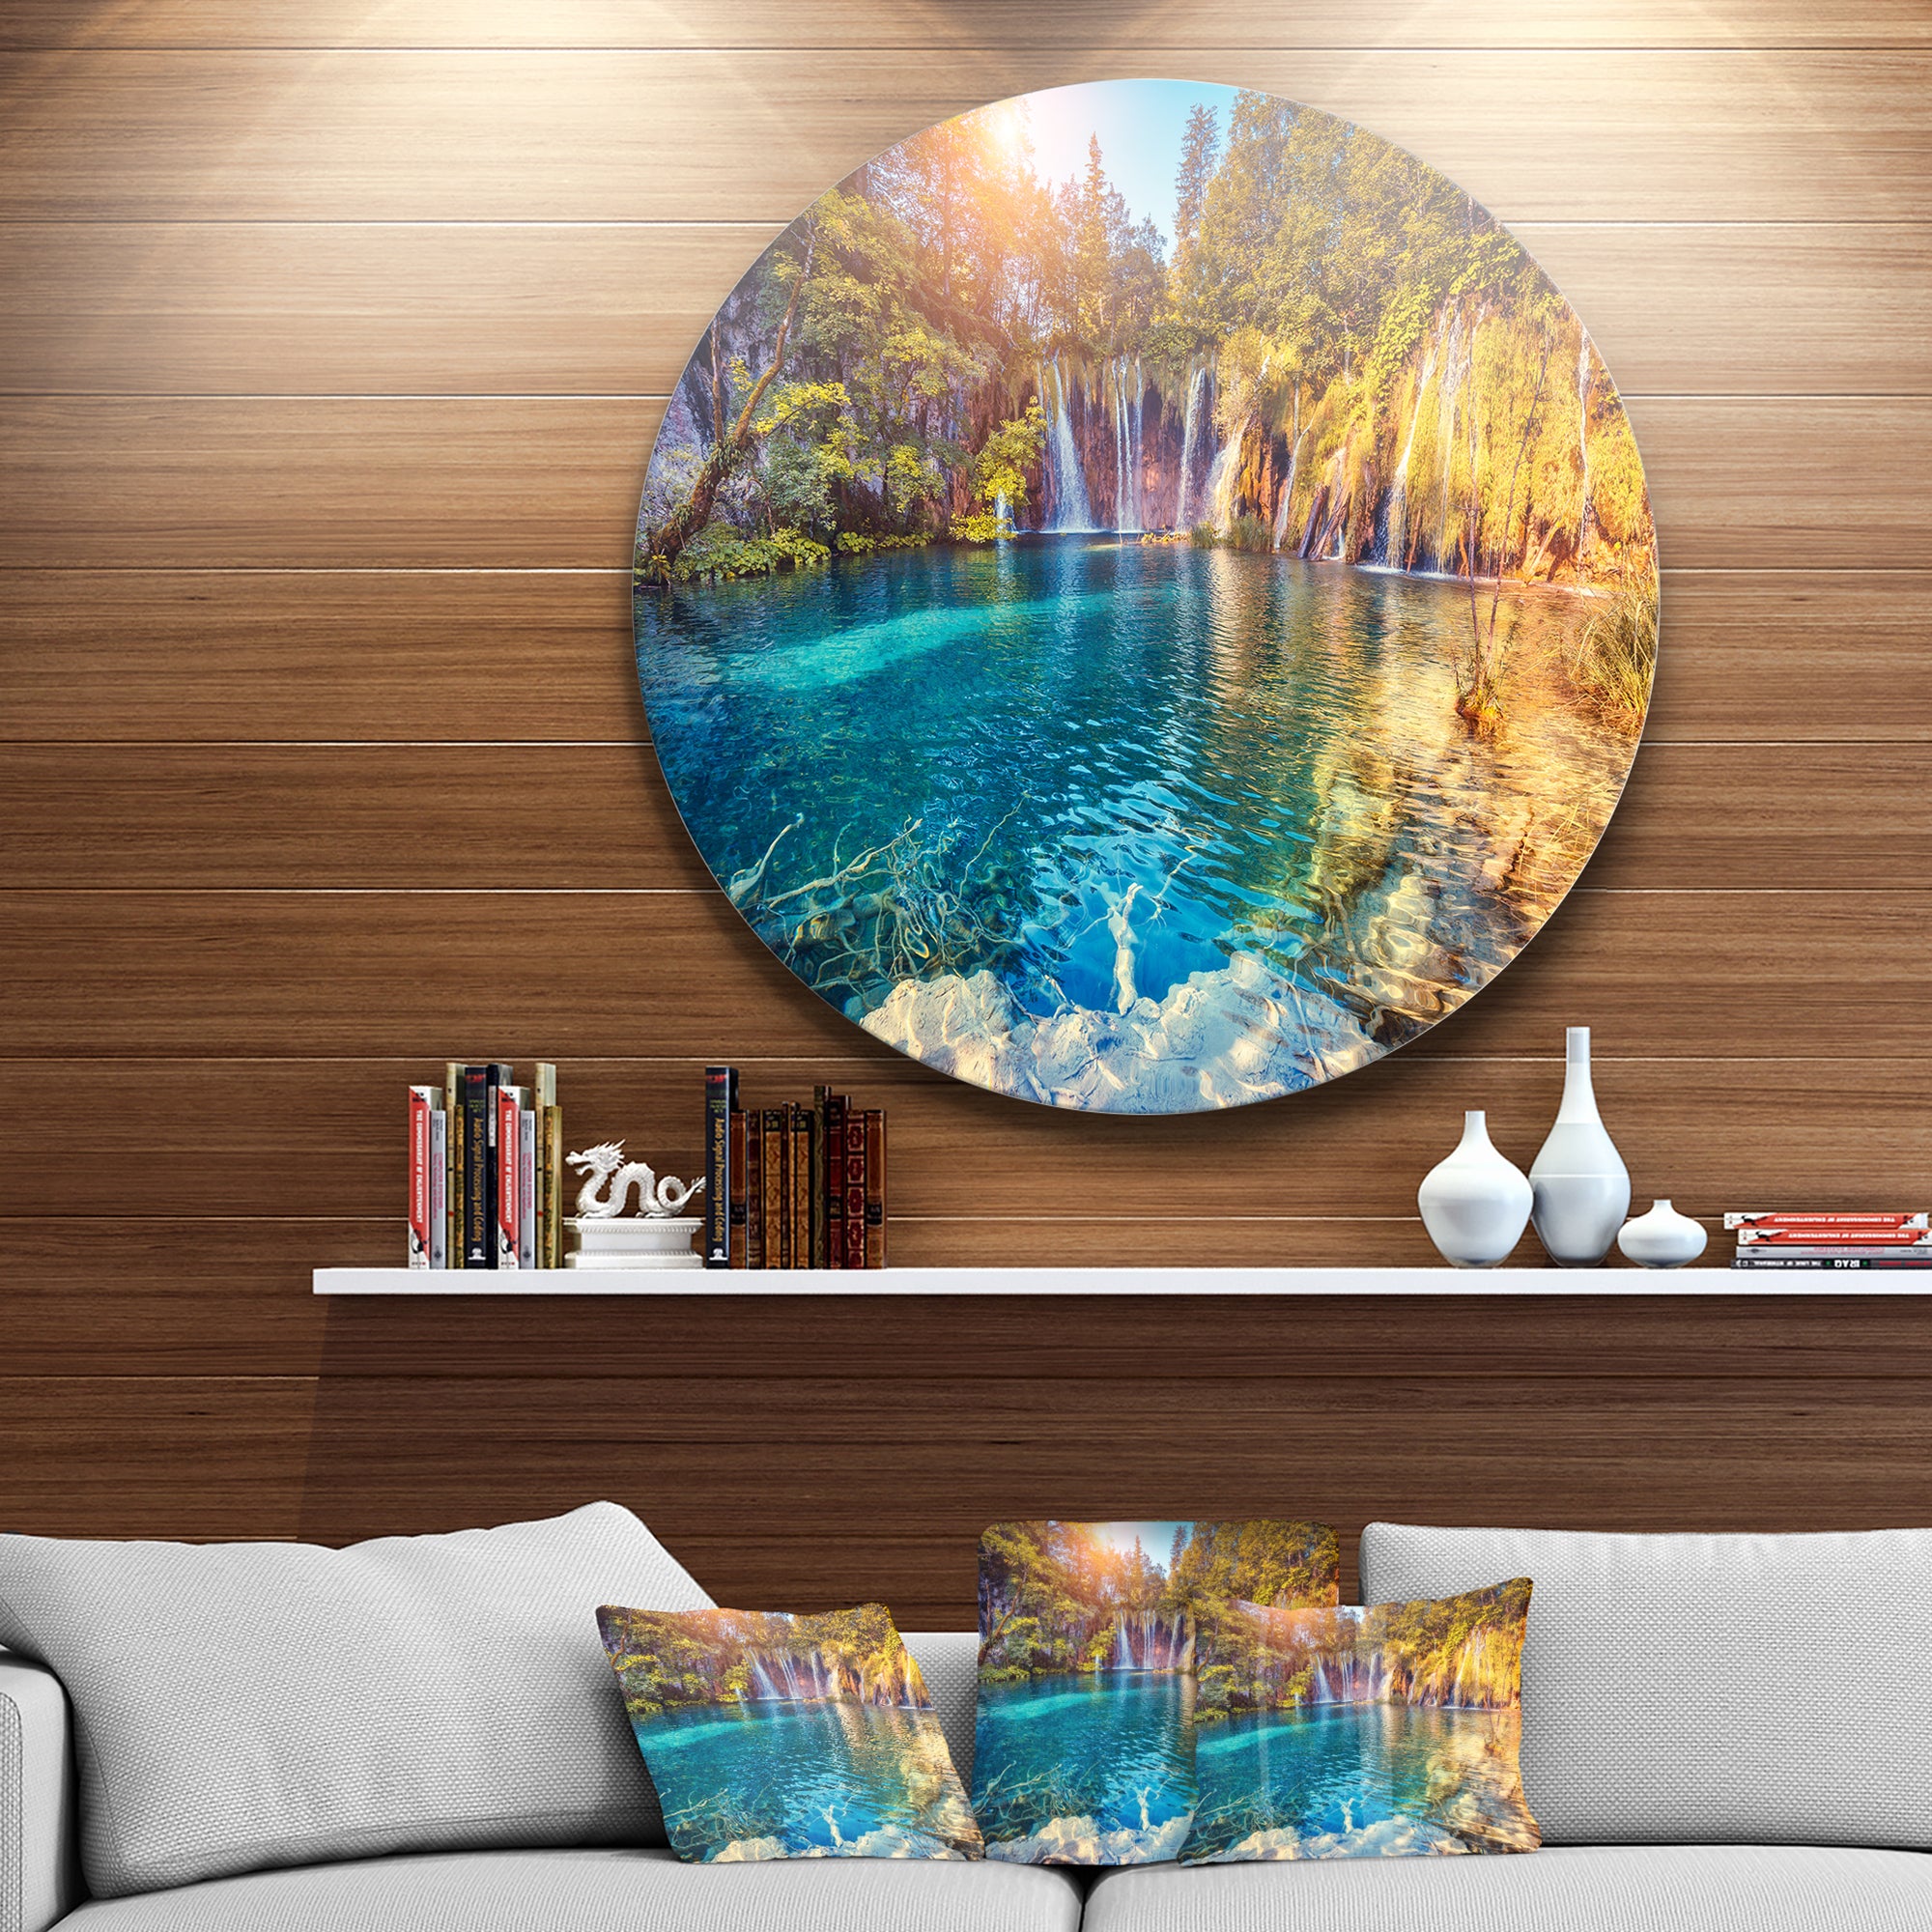 Turquoise Water and Sunny Beams' Landscape Photography Circle Metal Wall Art